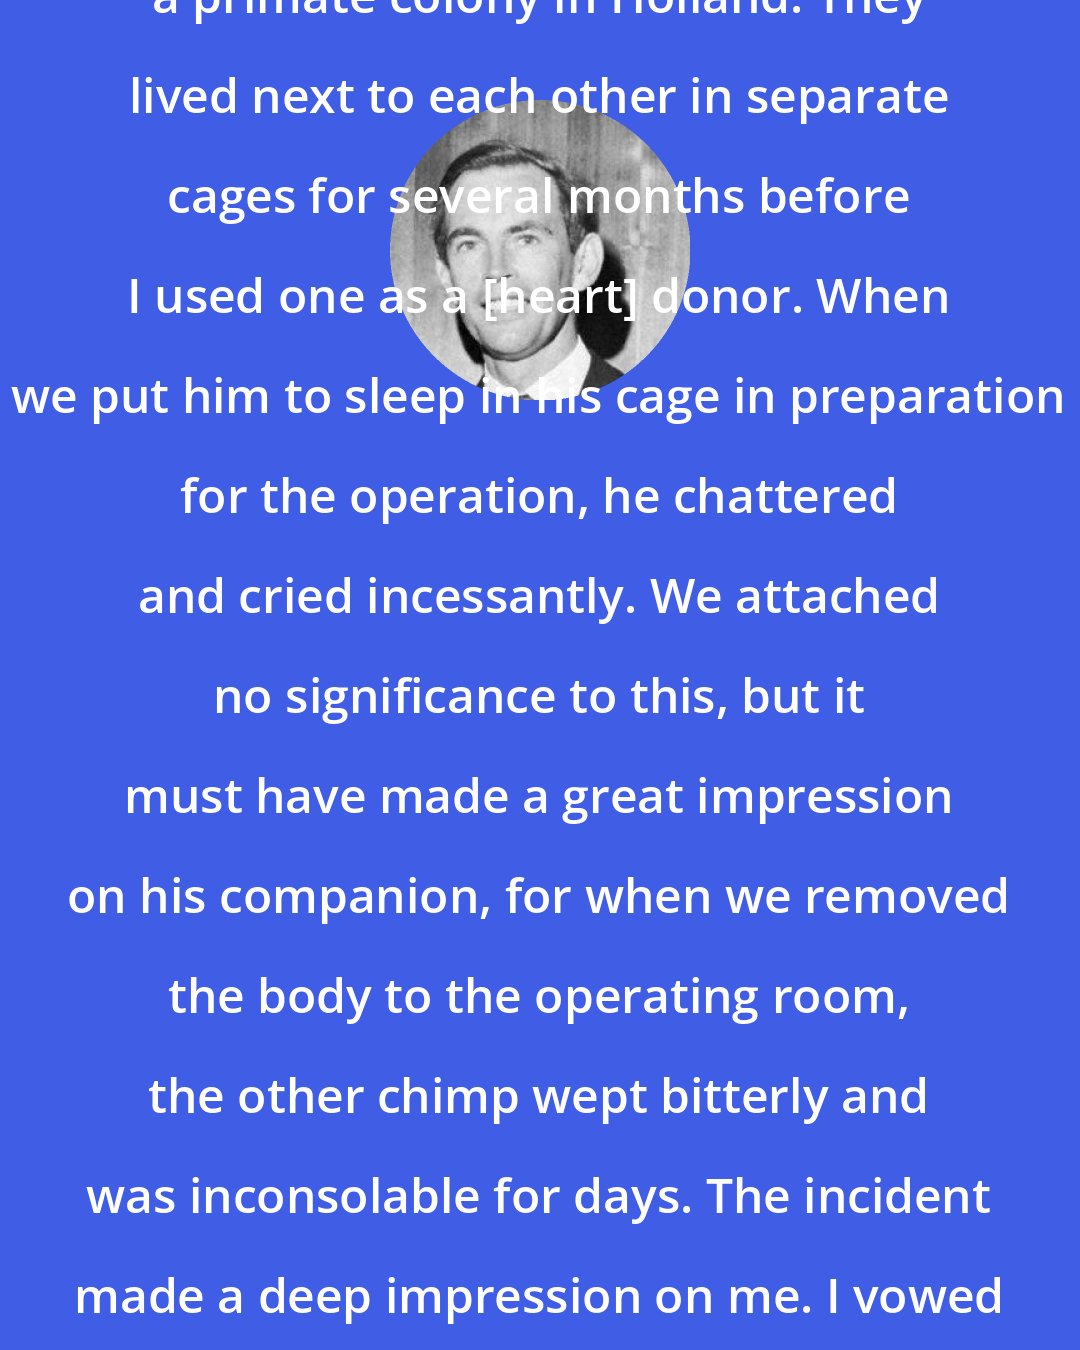 Christiaan Barnard: I had bought two male chimps from a primate colony in Holland. They lived next to each other in separate cages for several months before I used one as a [heart] donor. When we put him to sleep in his cage in preparation for the operation, he chattered and cried incessantly. We attached no significance to this, but it must have made a great impression on his companion, for when we removed the body to the operating room, the other chimp wept bitterly and was inconsolable for days. The incident made a deep impression on me. I vowed never again to experiment with such sensitive creatures.